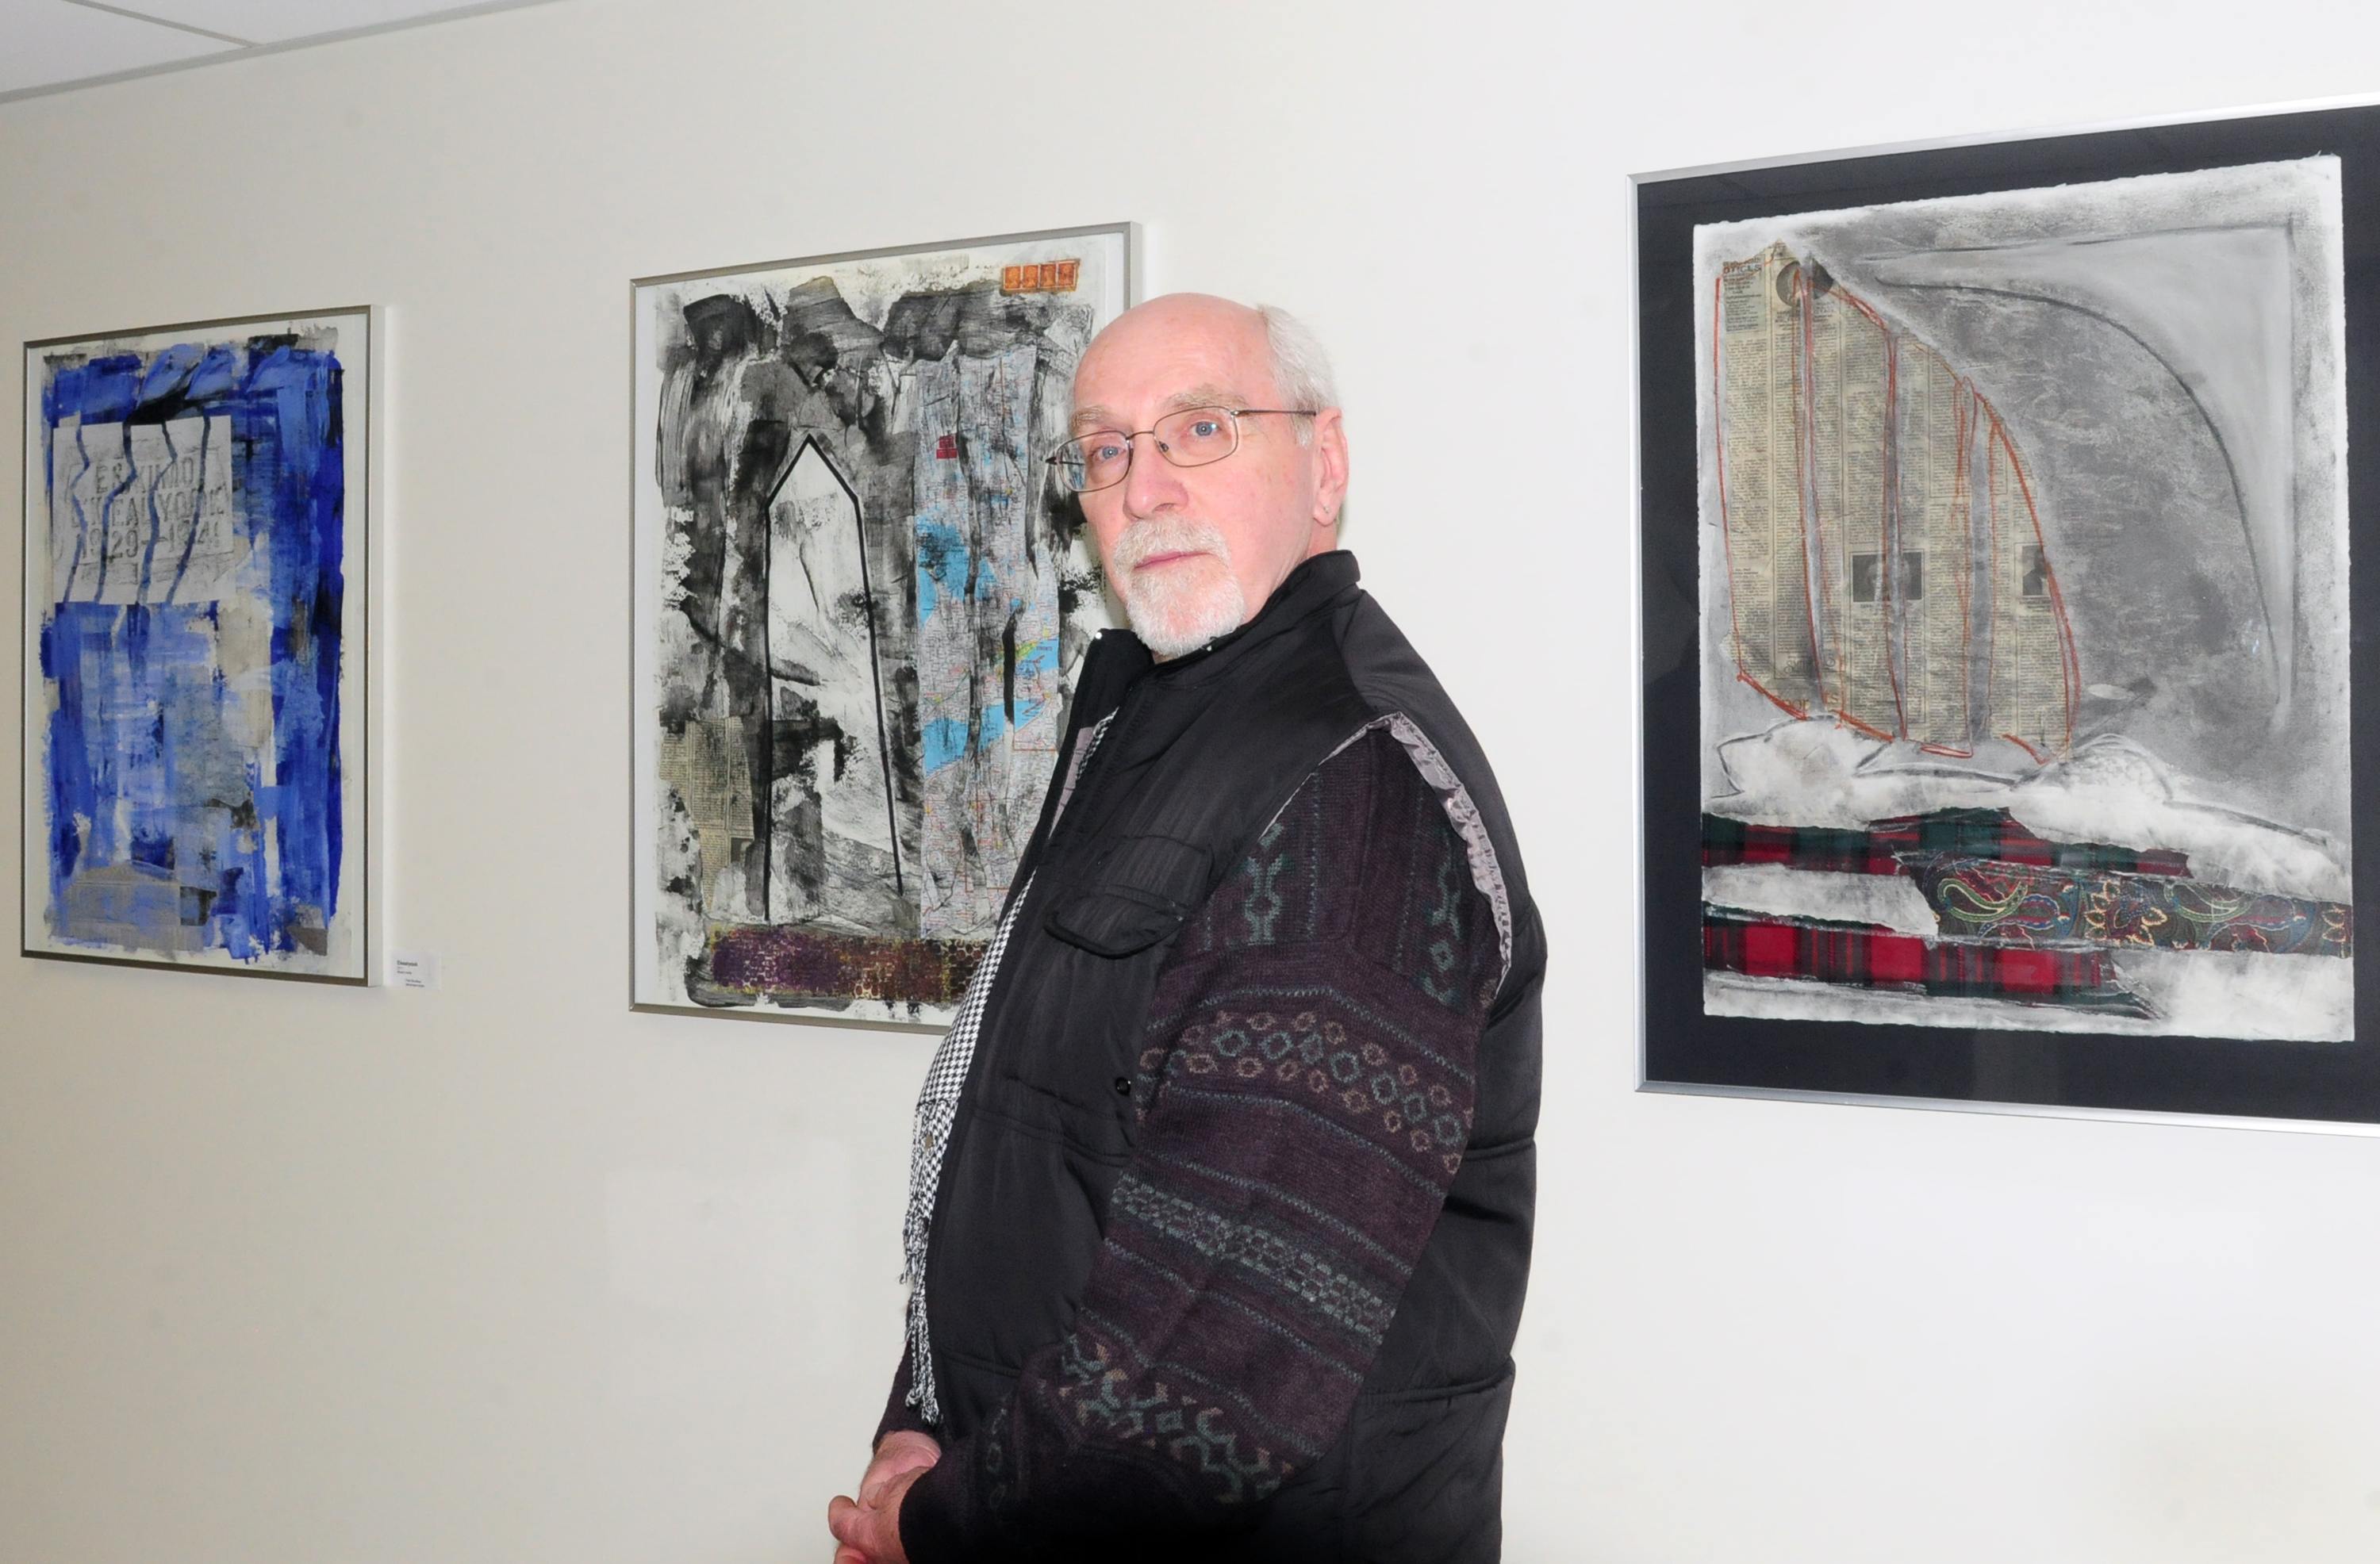 REFLECTING- City artist Paul Boultbee is currently showcasing a new series of works entitled Grave Matters in the Corridor Gallery through to the end of November. The Gallery is located in the basement of the Recreation Centre.